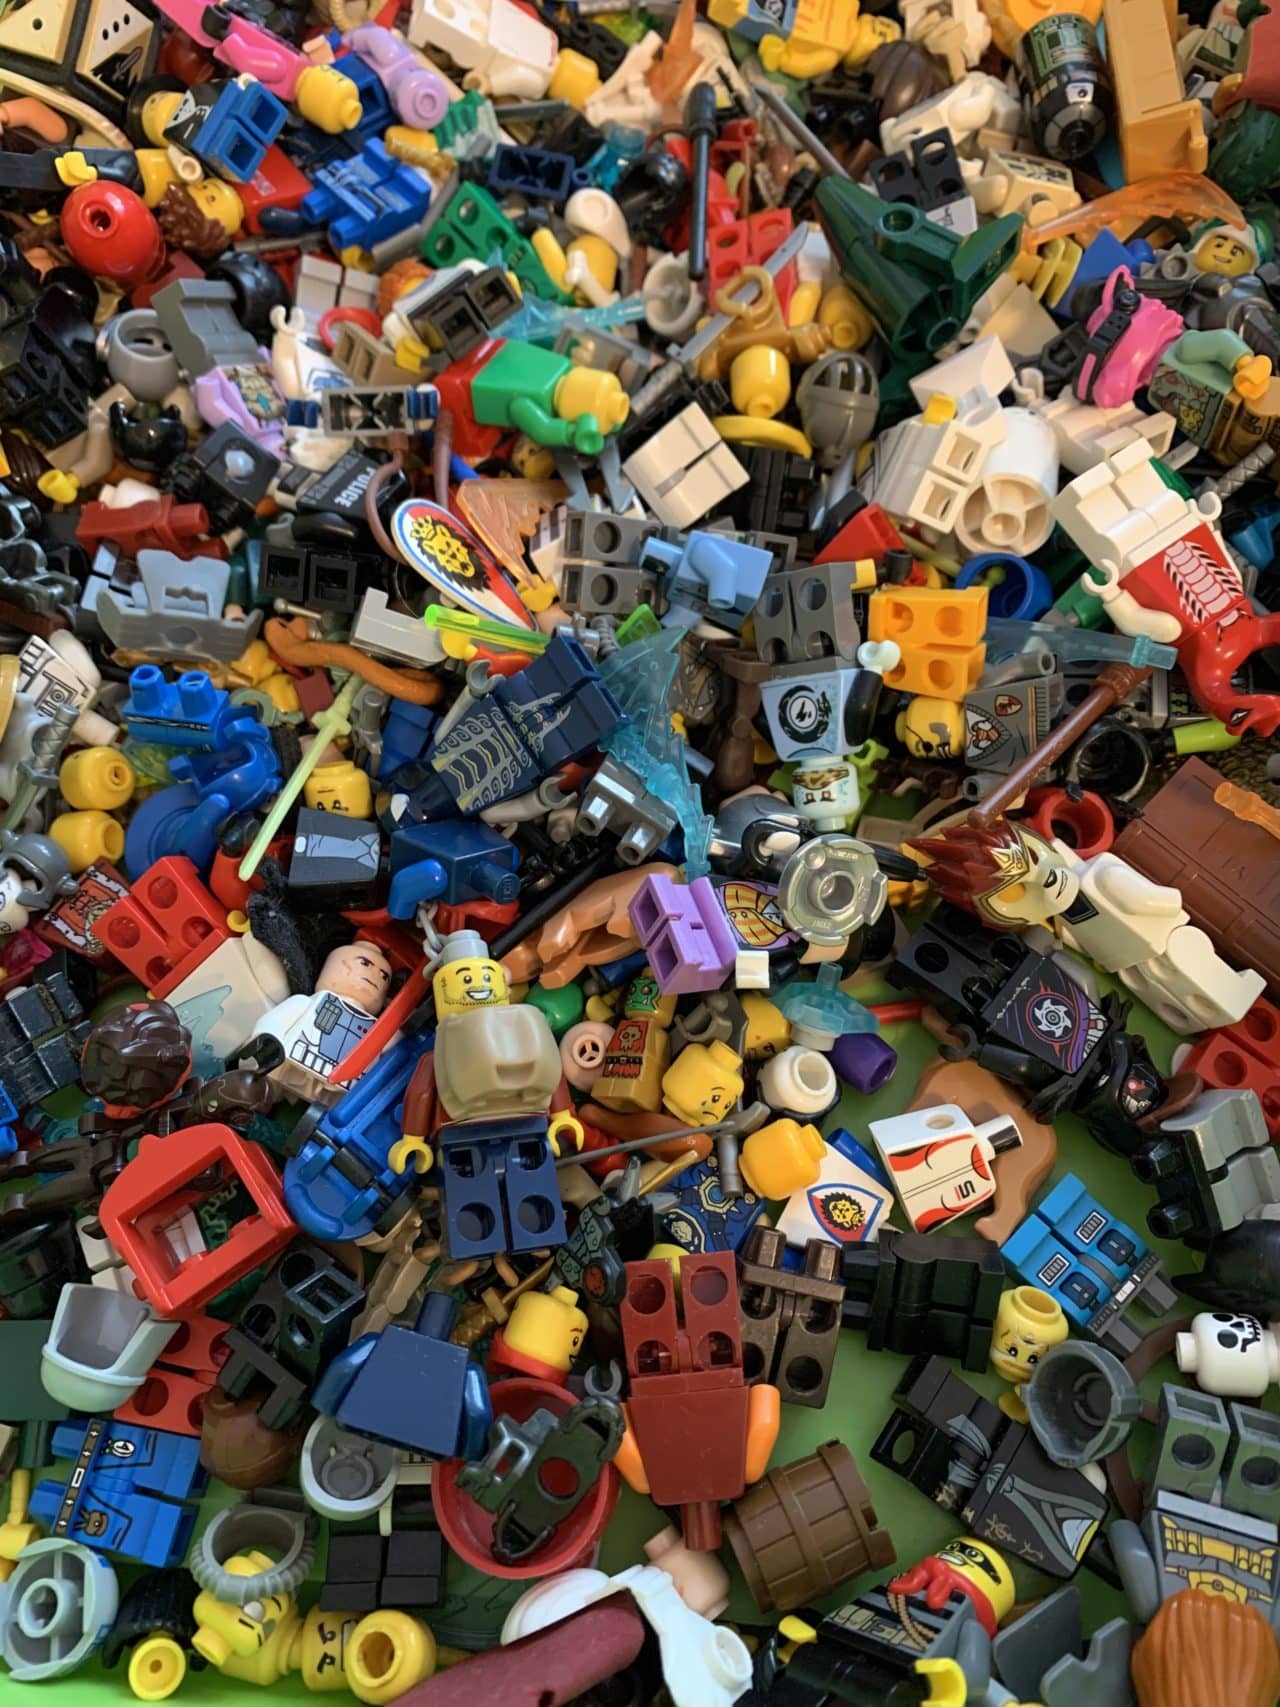 Lego Mini Figurines And Brick Pieces In A Green Collection Box